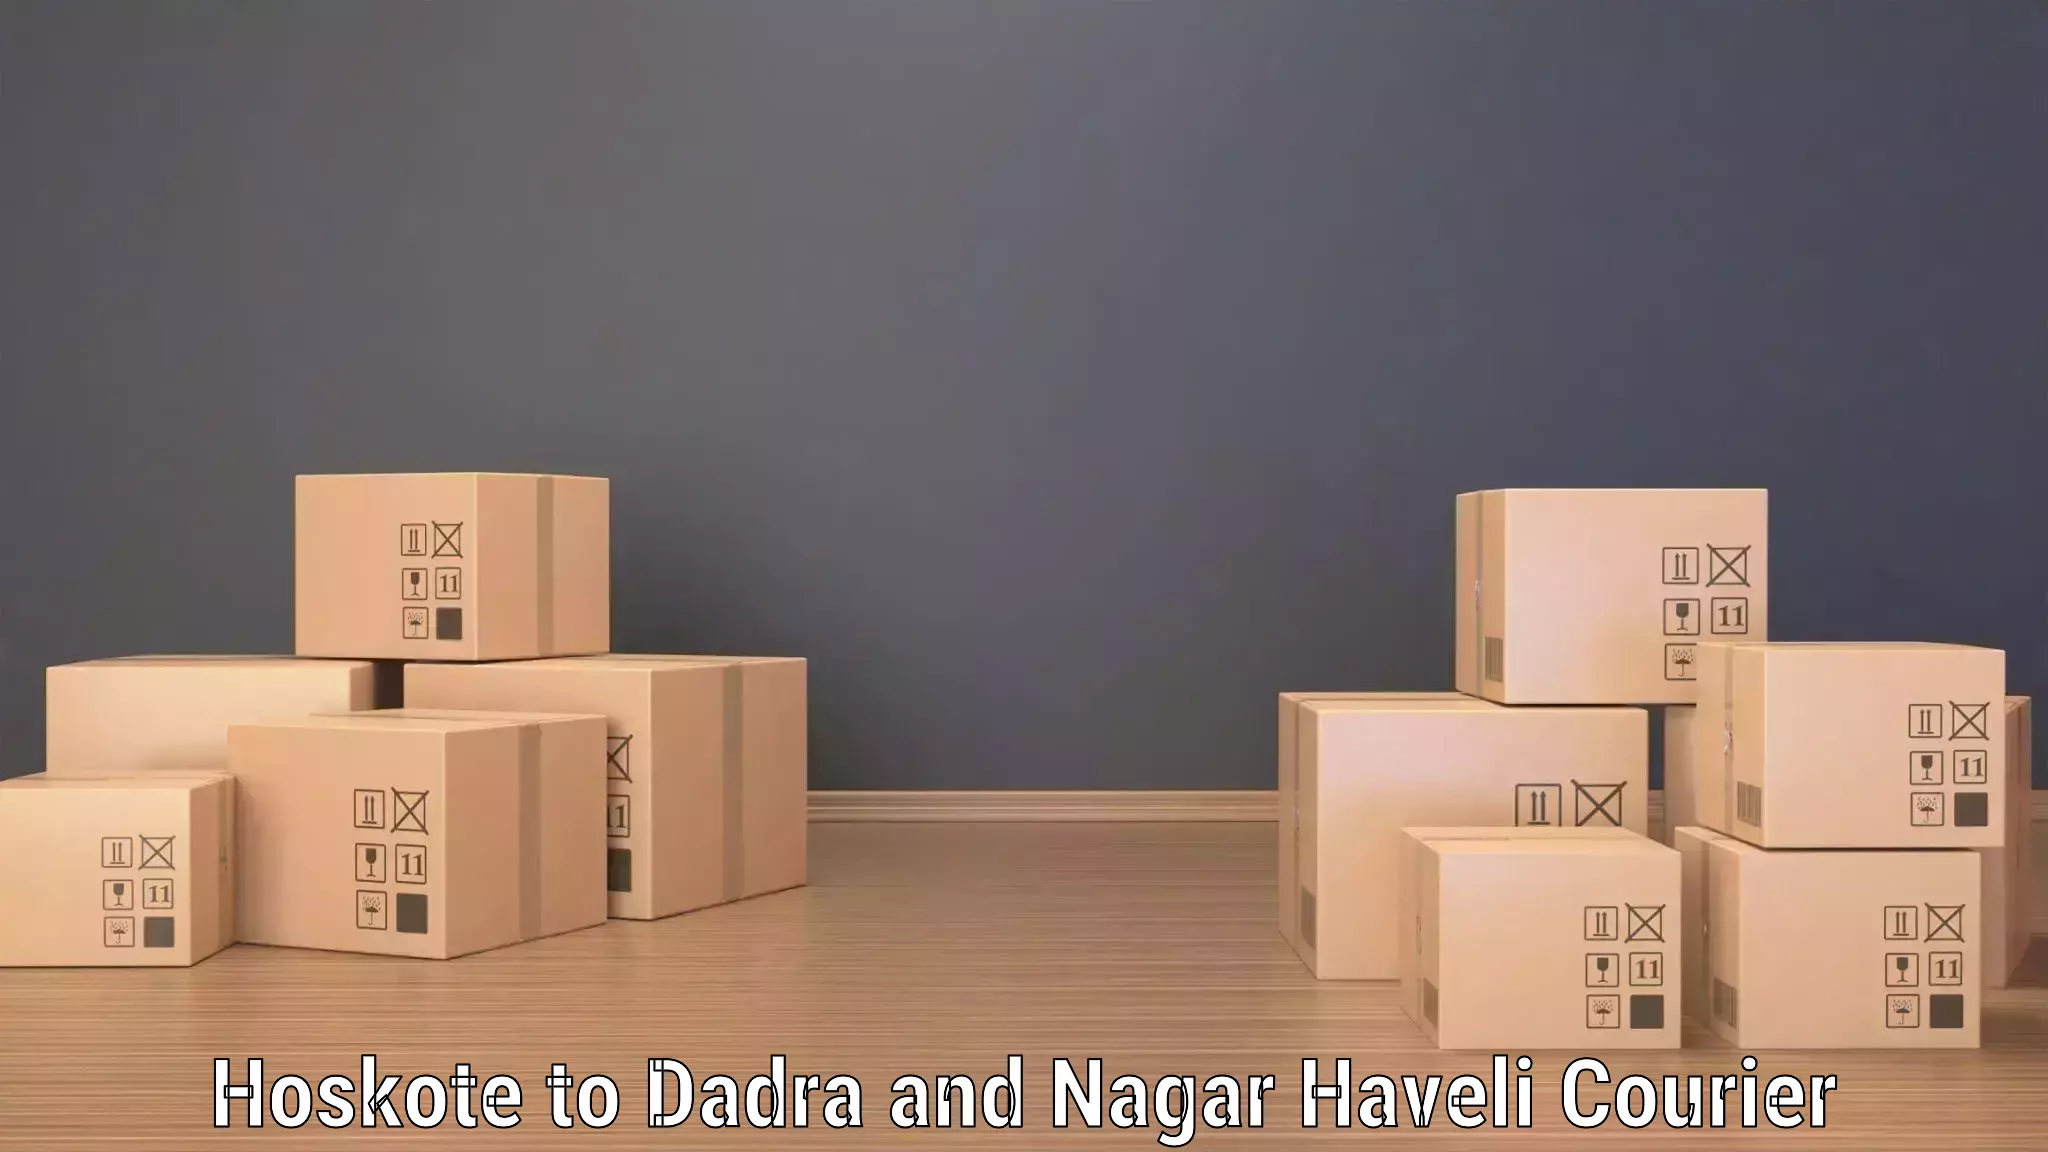 Rural area delivery Hoskote to Dadra and Nagar Haveli